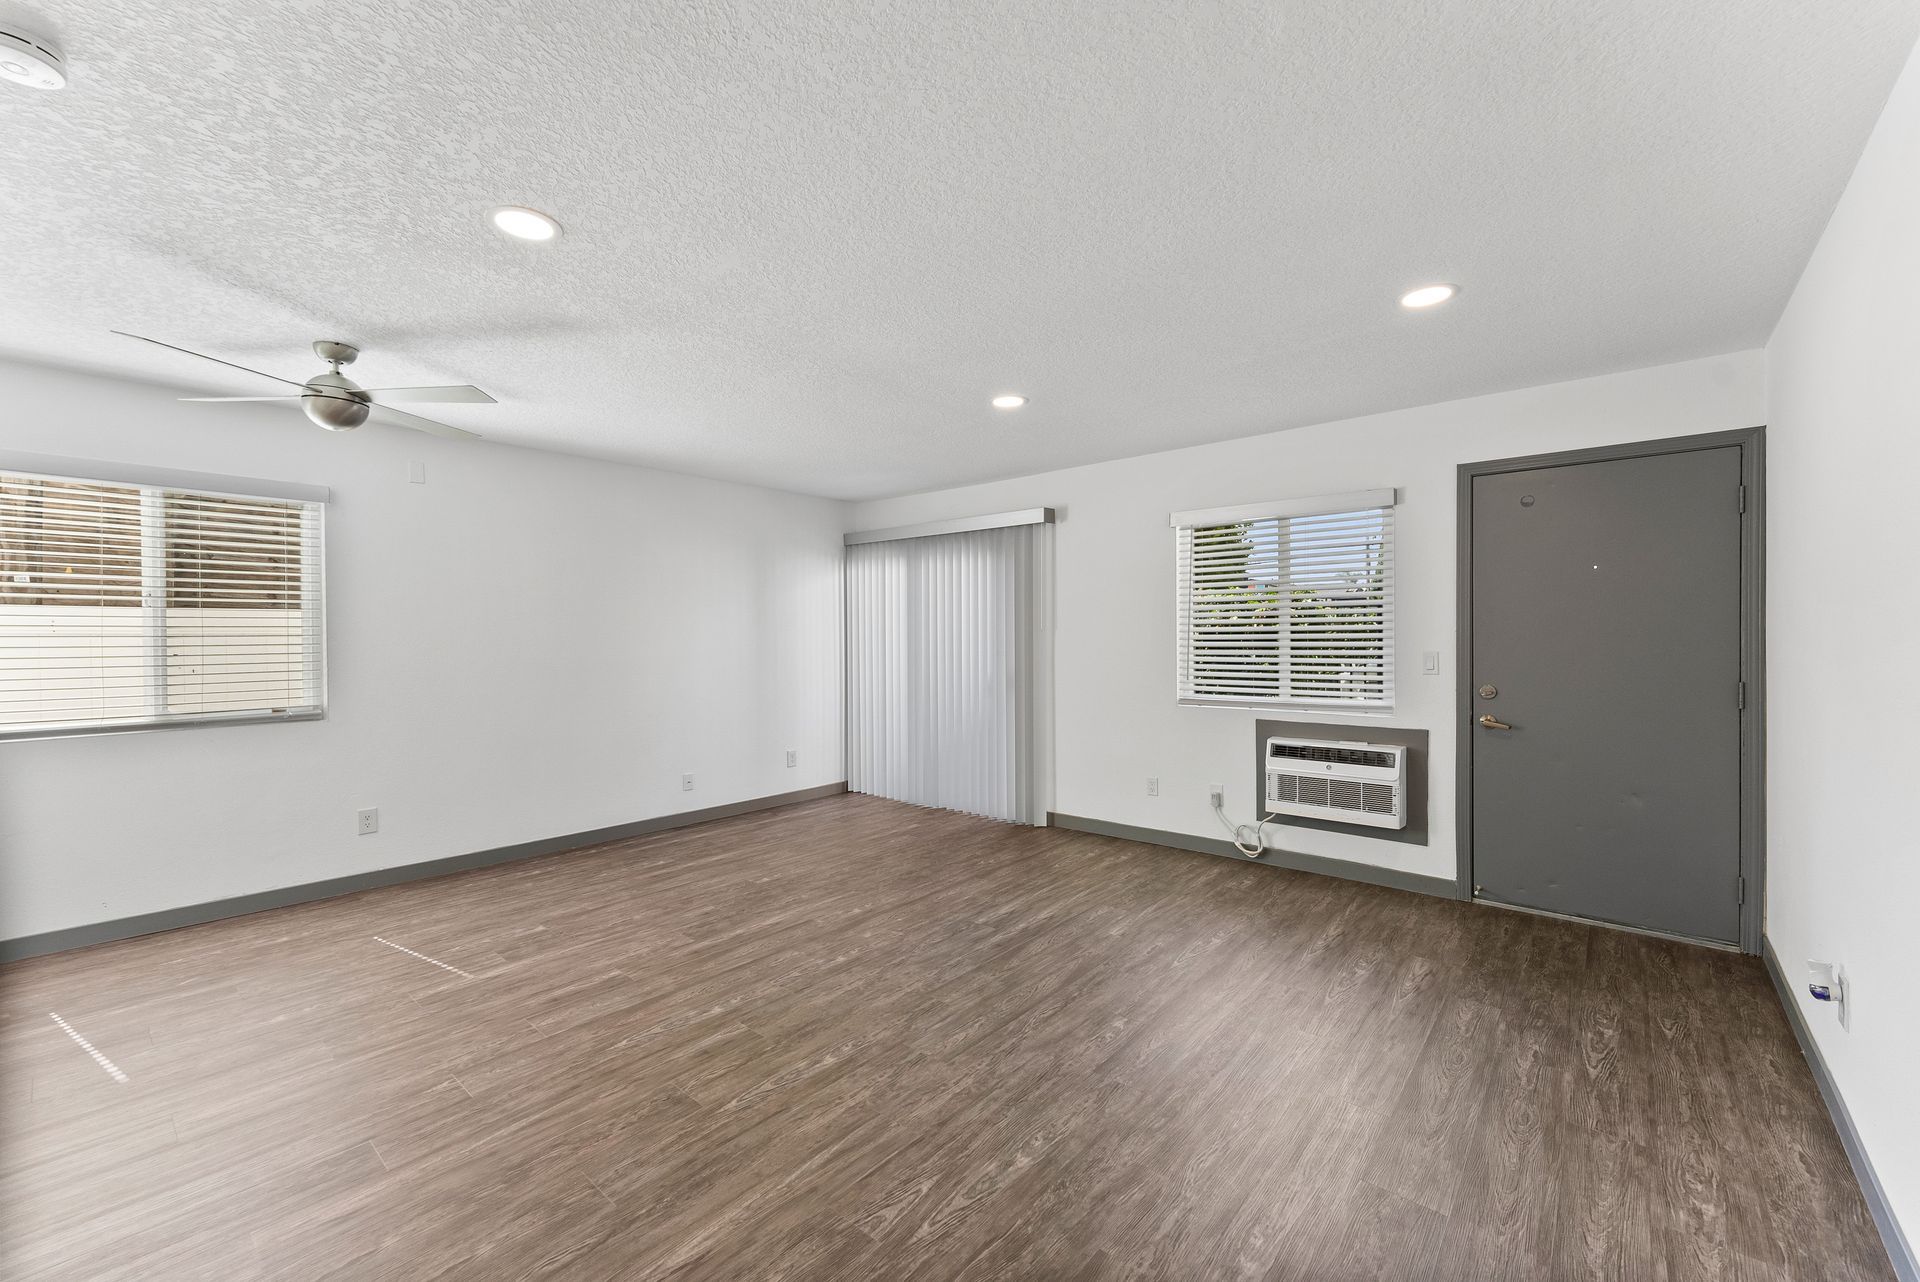 Sliding Photo Gallery Displaying Apartment Features- Open living room with wood floors and large window